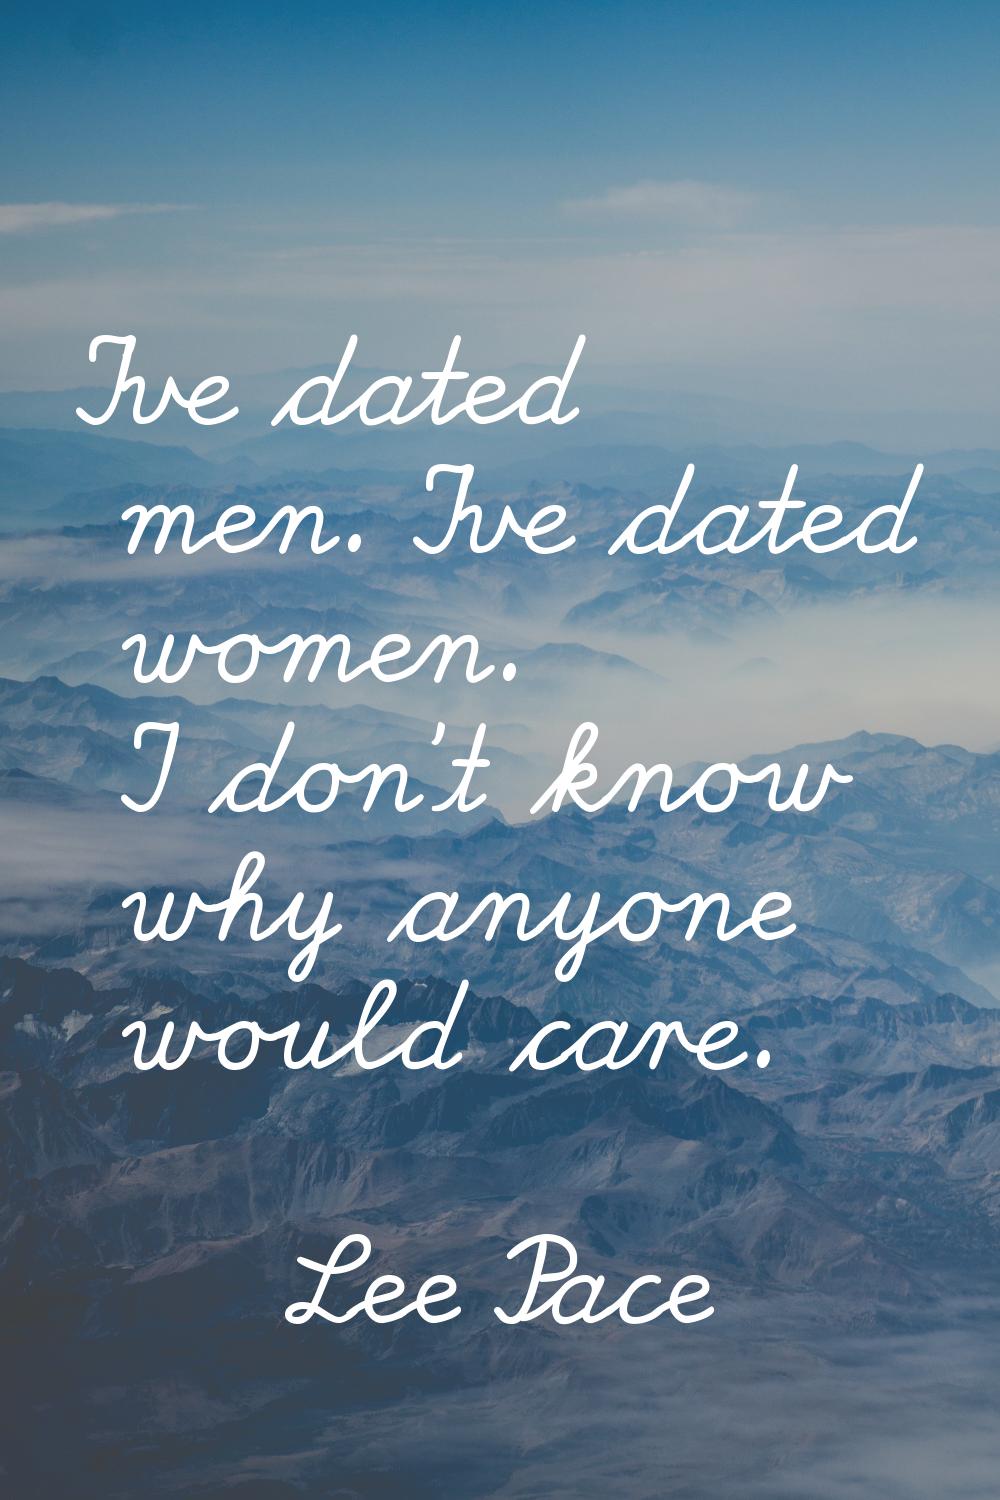 I've dated men. I've dated women. I don't know why anyone would care.